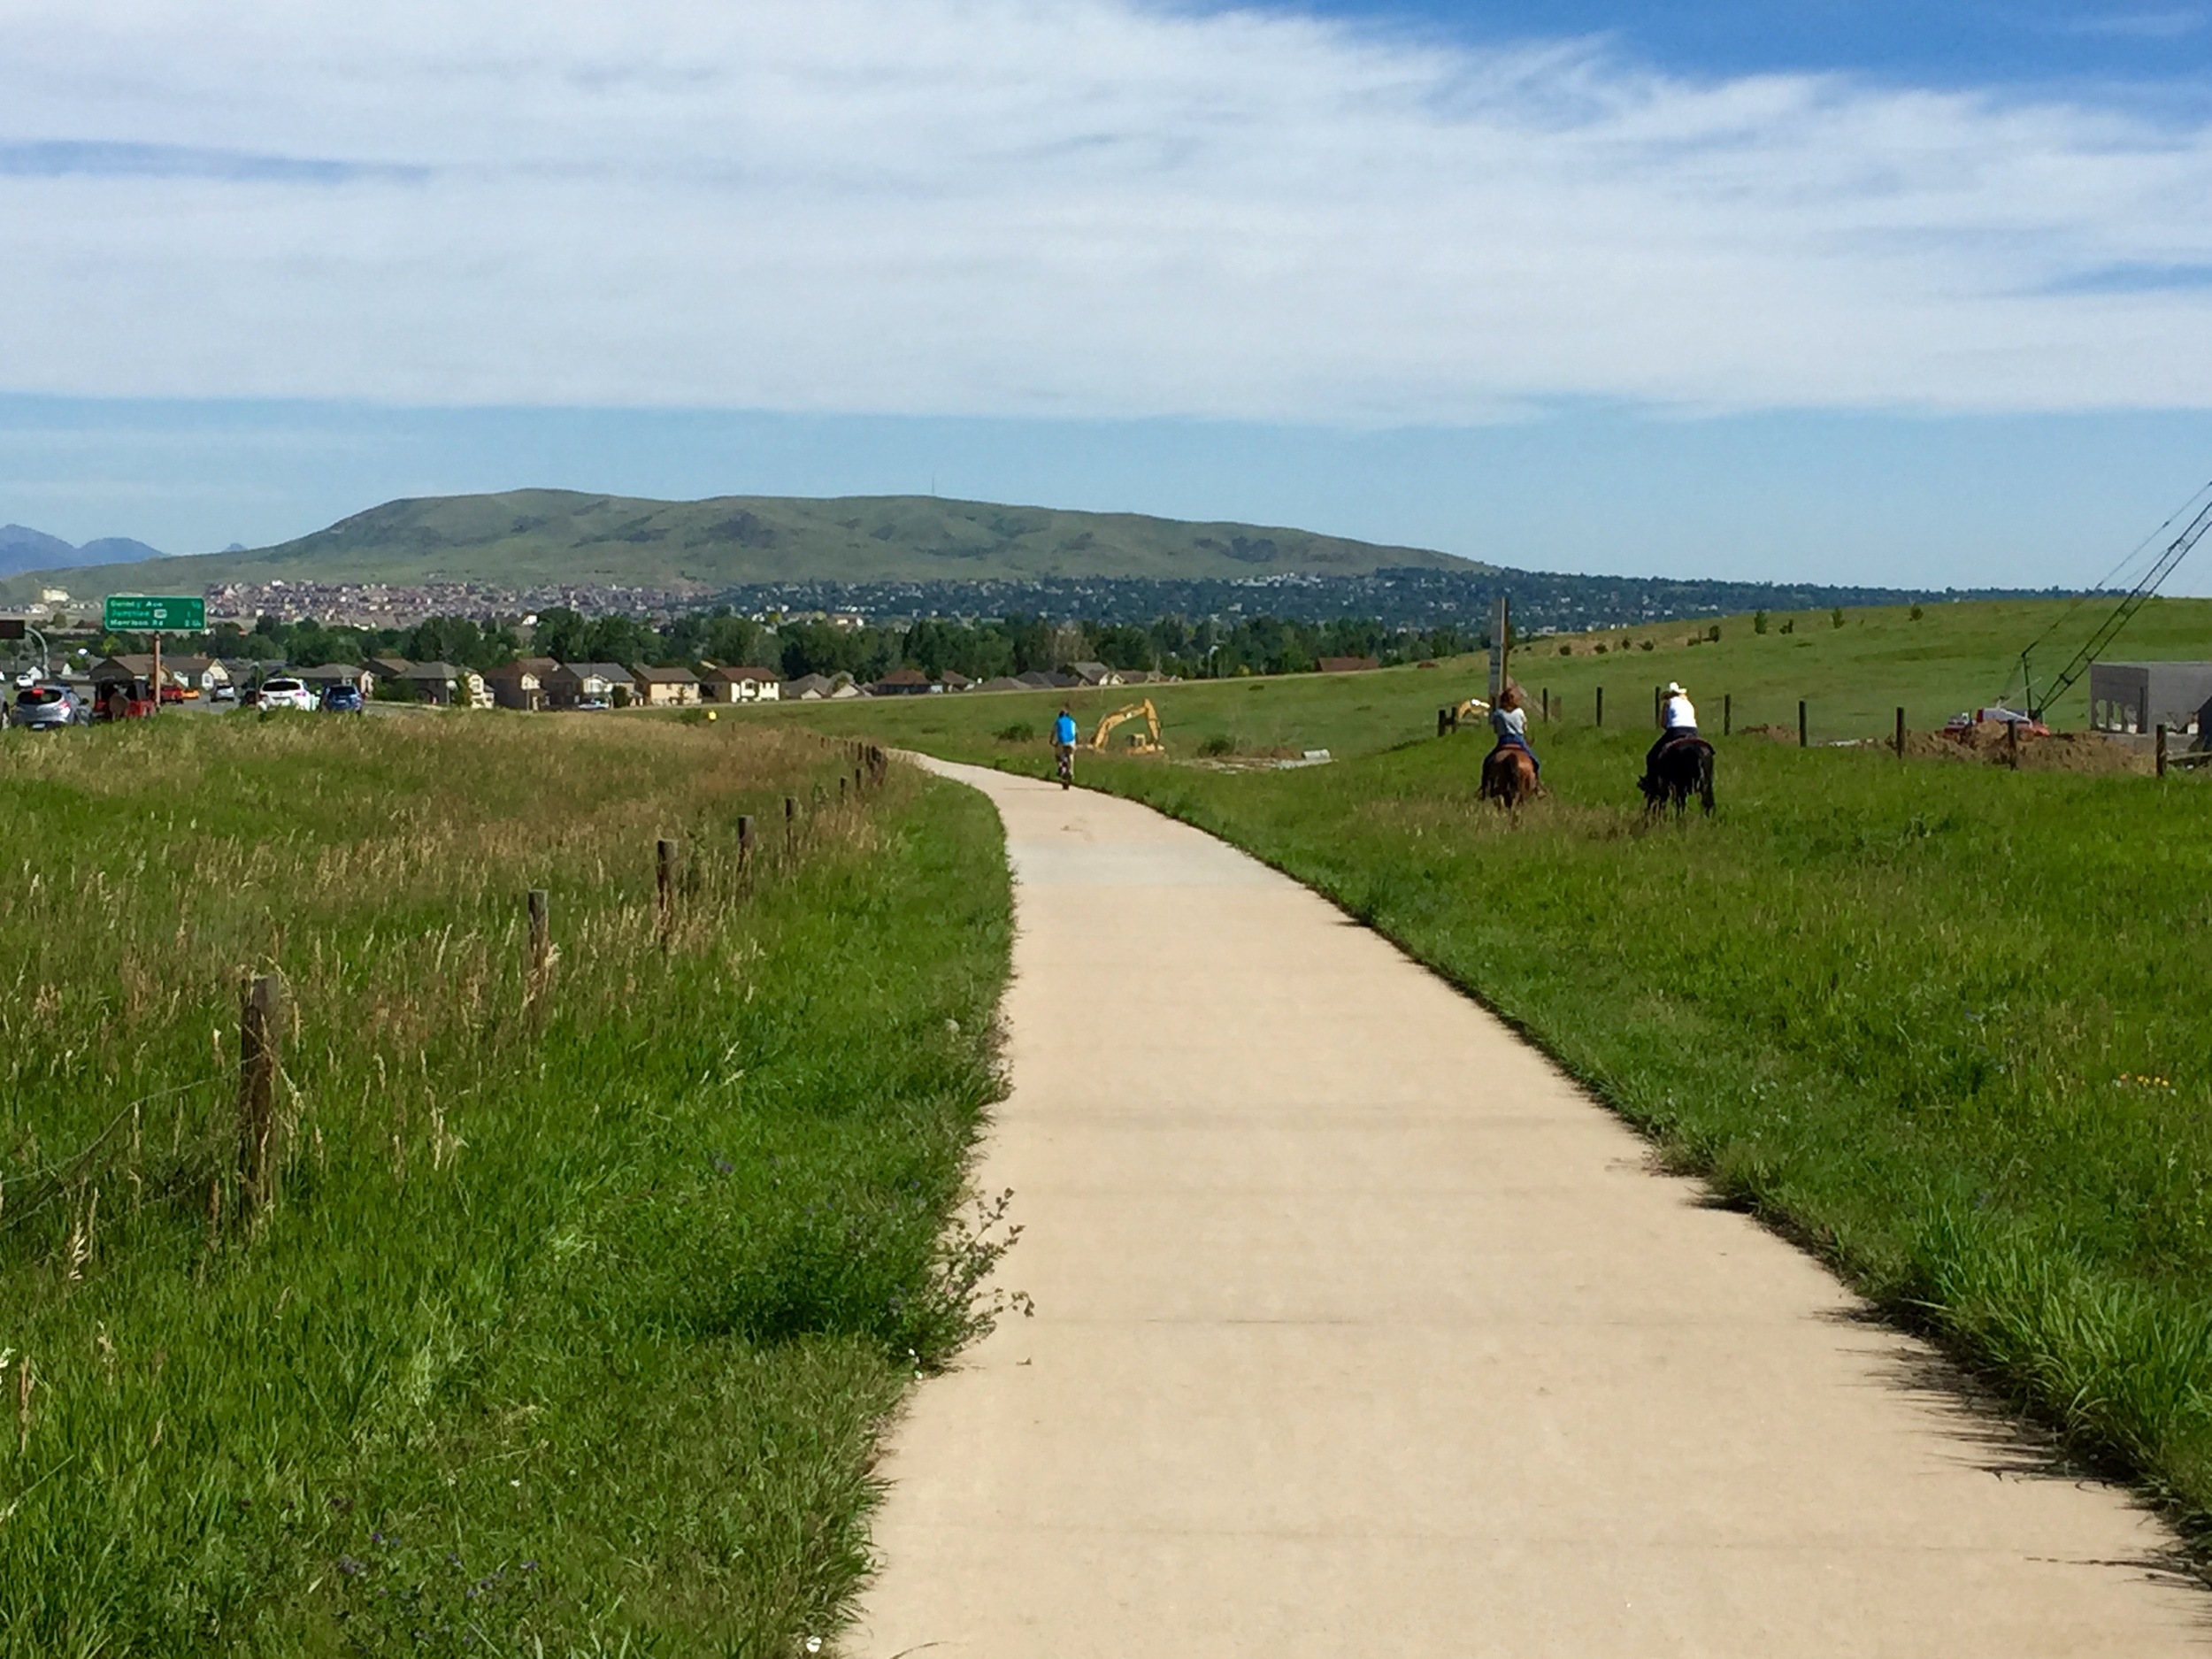  Sometimes motorists, cyclists, and even equestrians share the trails around Denver 